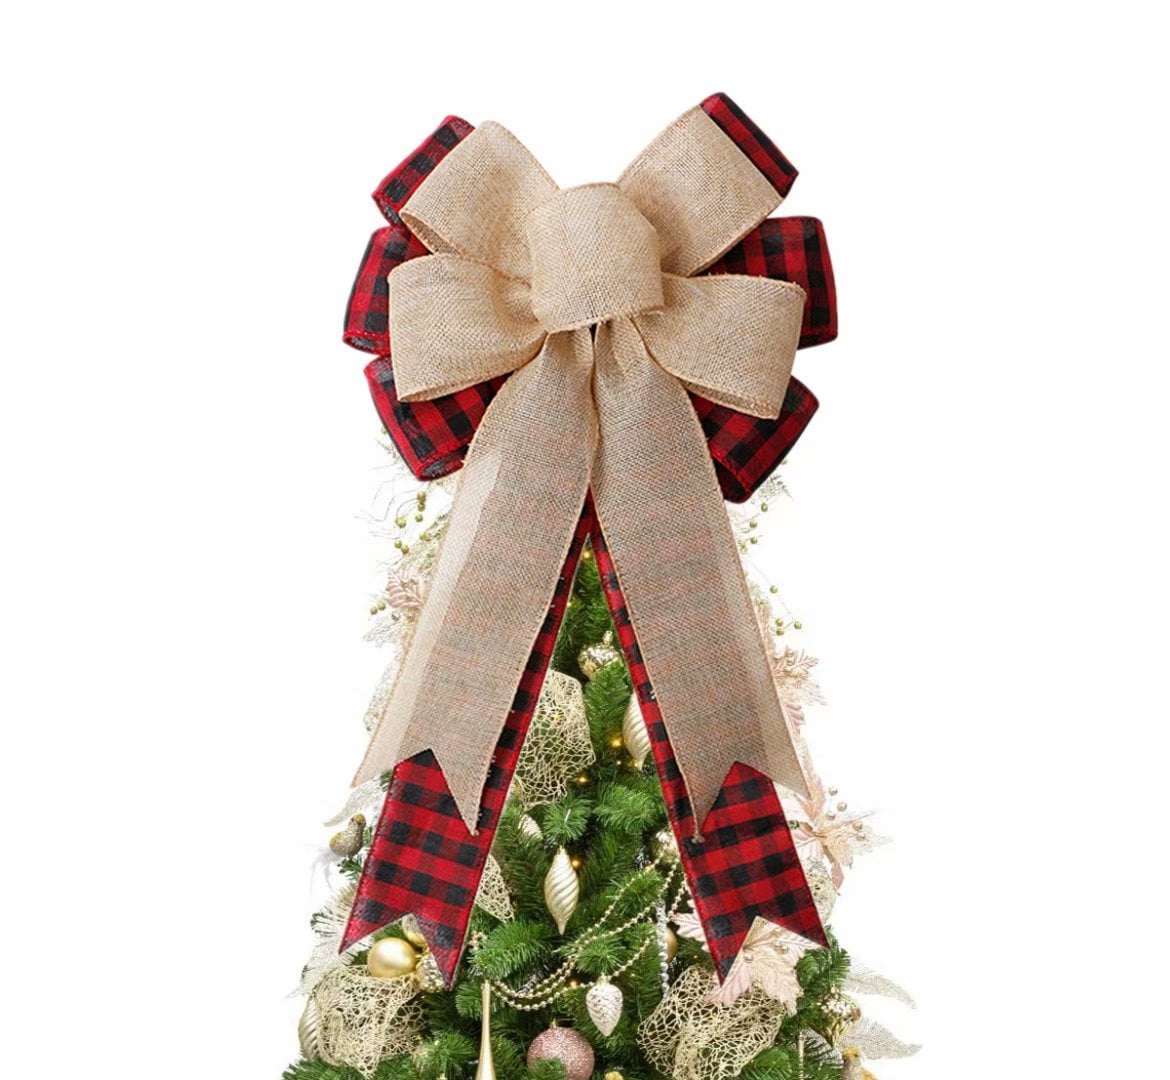 KHOYIME Christmas Tree Topper Xmas Bow Buffalo Plaid Red Black Burlap Christmas Decorations Party Room Decor Wreath Fireplace Hanging Ornaments red 1